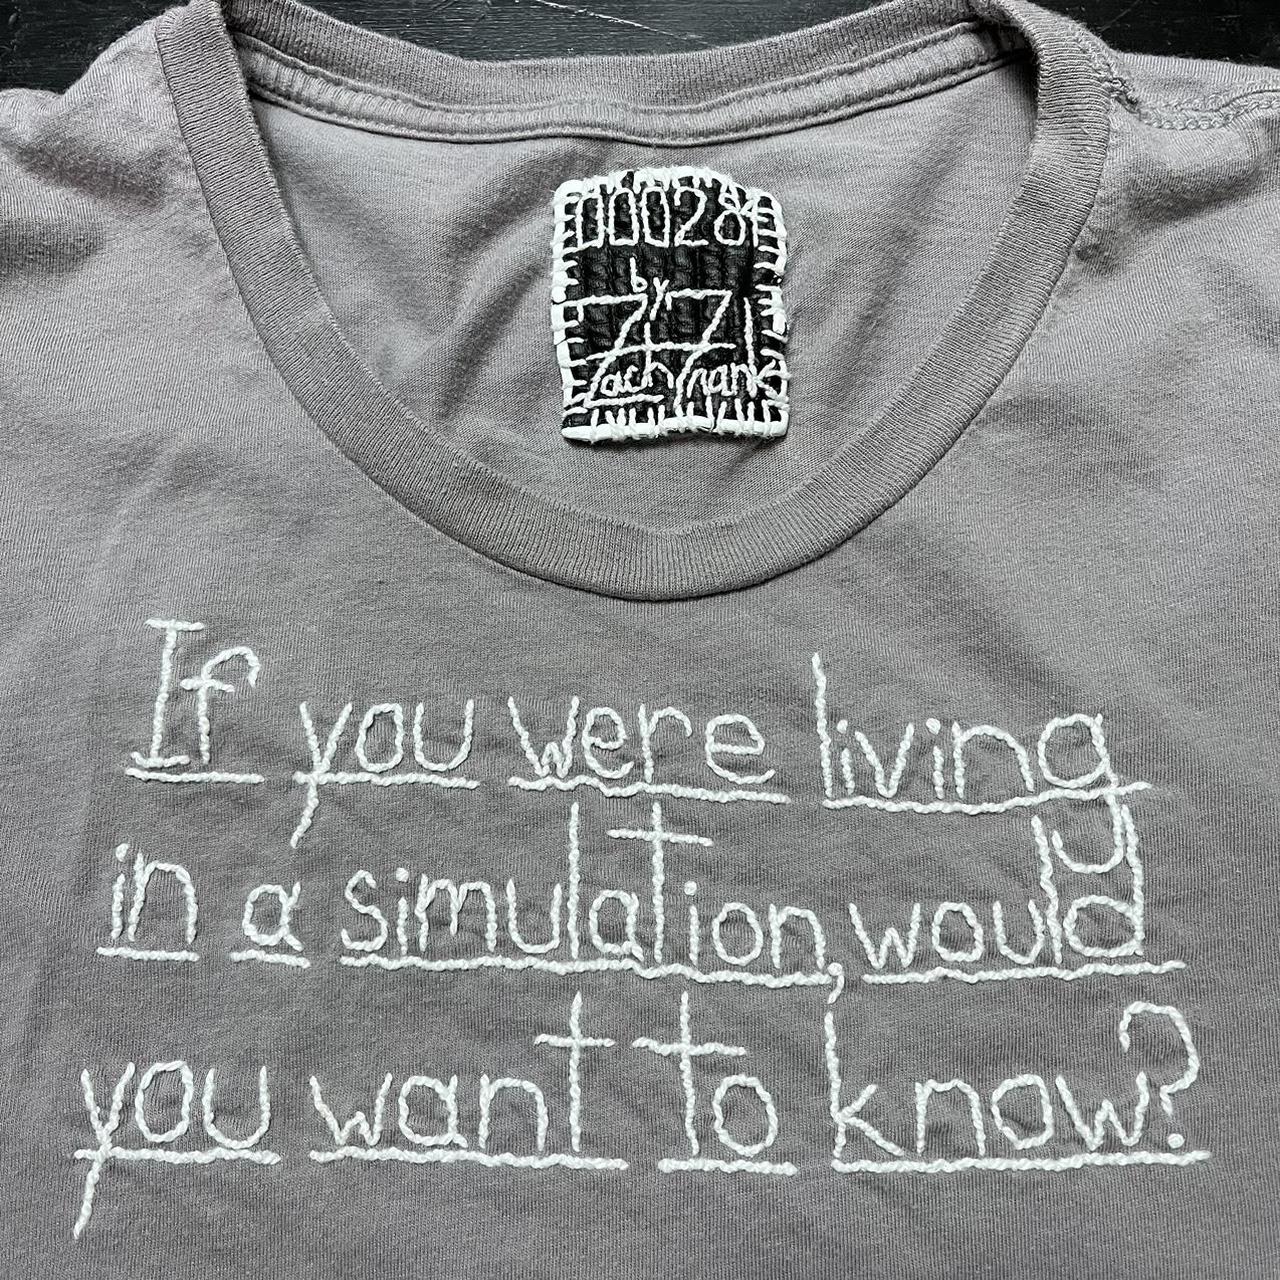 000575 - One of a Kind Original T-Shirt [L] “HAHAHAHAHAHA — One of a Kind  by Zach Frank